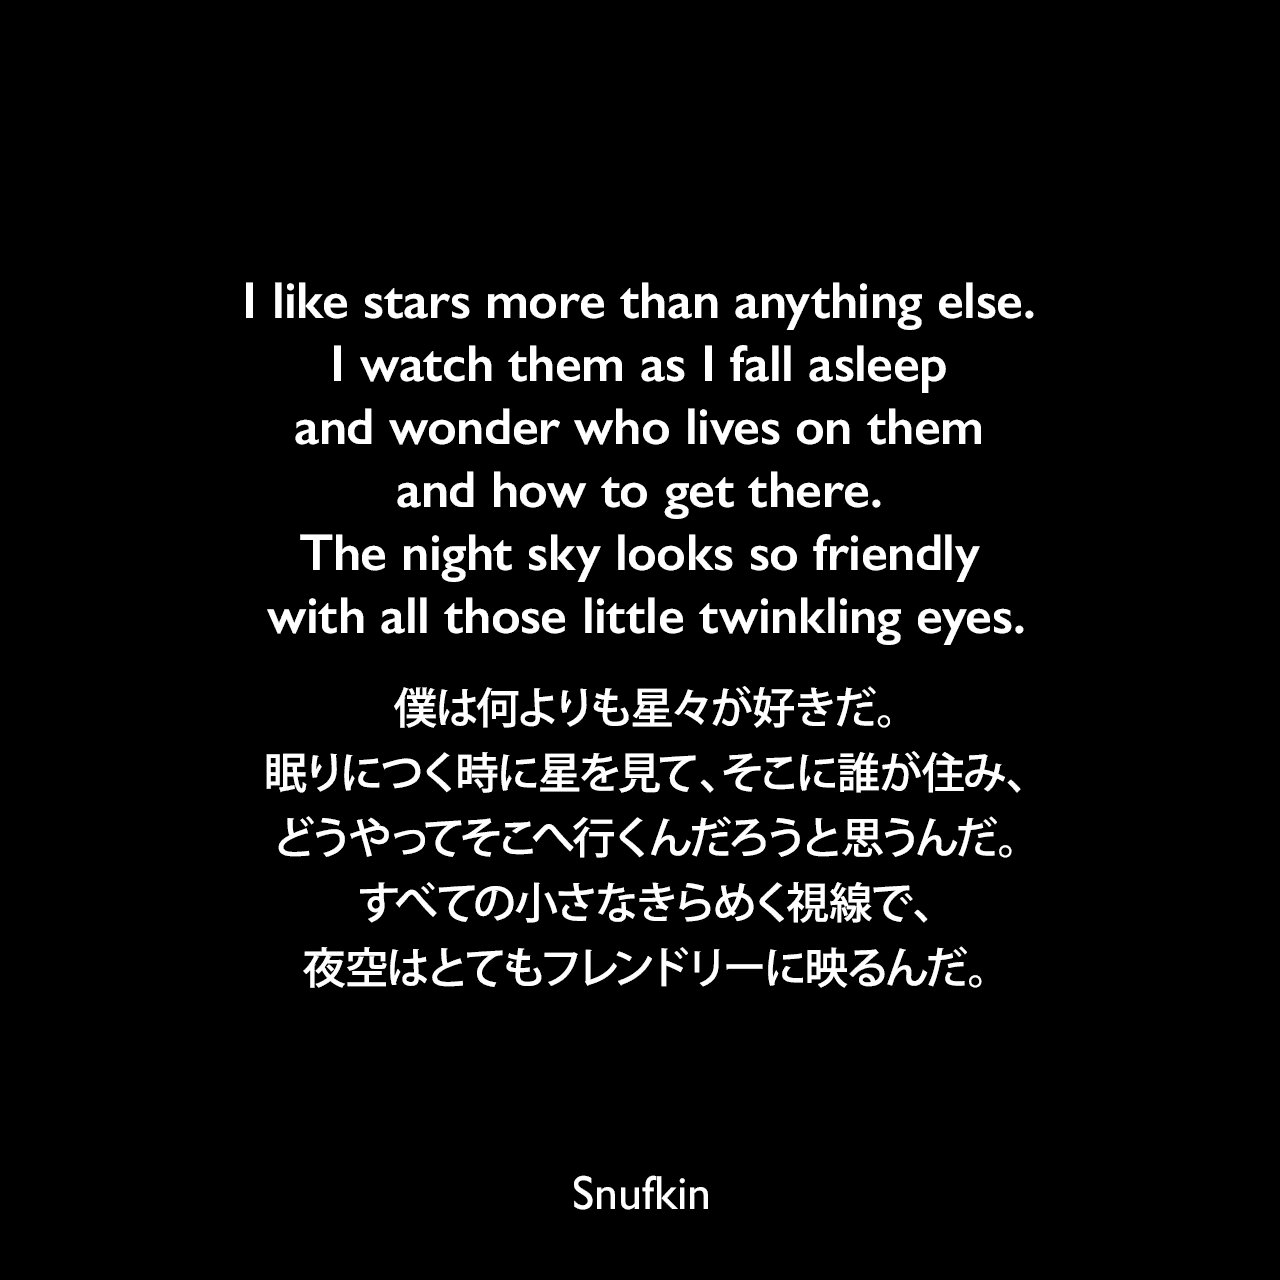 I like stars more than anything else. I watch them as I fall asleep and wonder who lives on them and how to get there. The night sky looks so friendly with all those little twinkling eyes.僕は何よりも星々が好きだ。眠りにつく時に星を見て、そこに誰が住み、どうやってそこへ行くんだろうと思うんだ。すべての小さなきらめく視線で、夜空はとてもフレンドリーに映るんだ。Snufkin